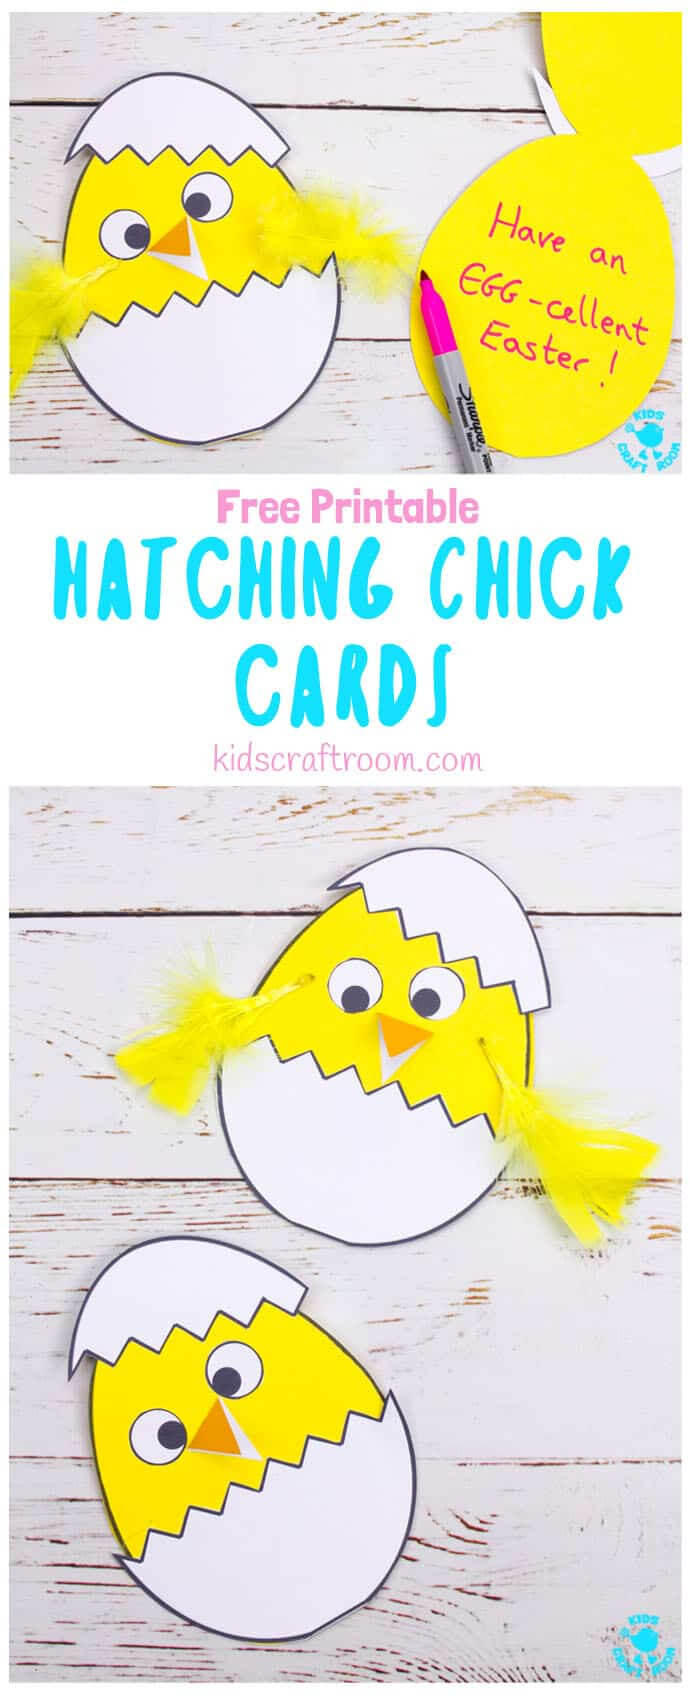 Hatching Chick Easter Card Craft - Kids Craft Room For Easter Chick Card Template